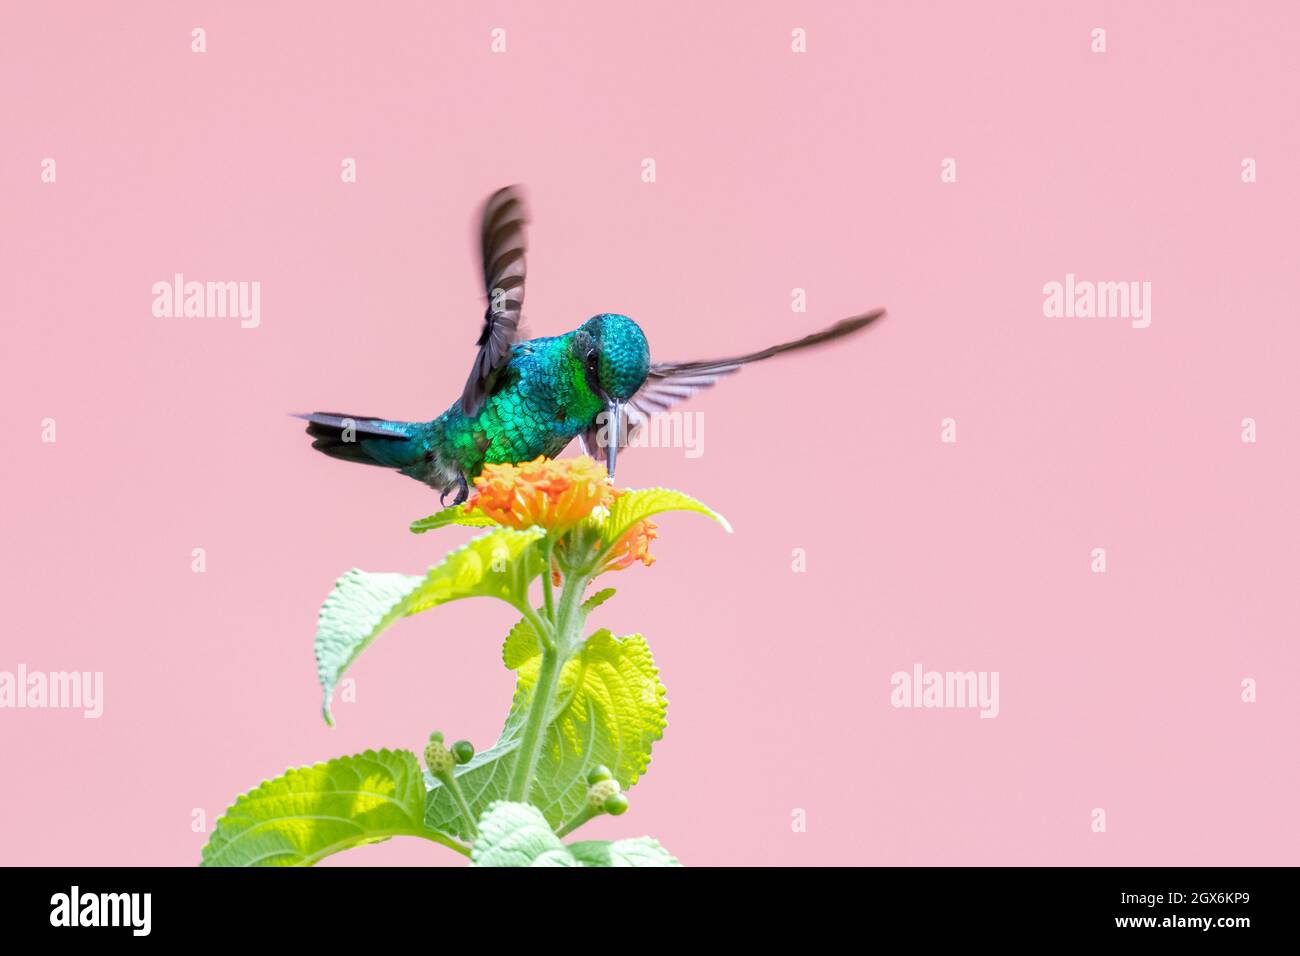 A Blue-chinned Sapphire hummingbird, chlorestes notata, feeding on orange Lantana flowers isolated on a pink background. Stock Photo